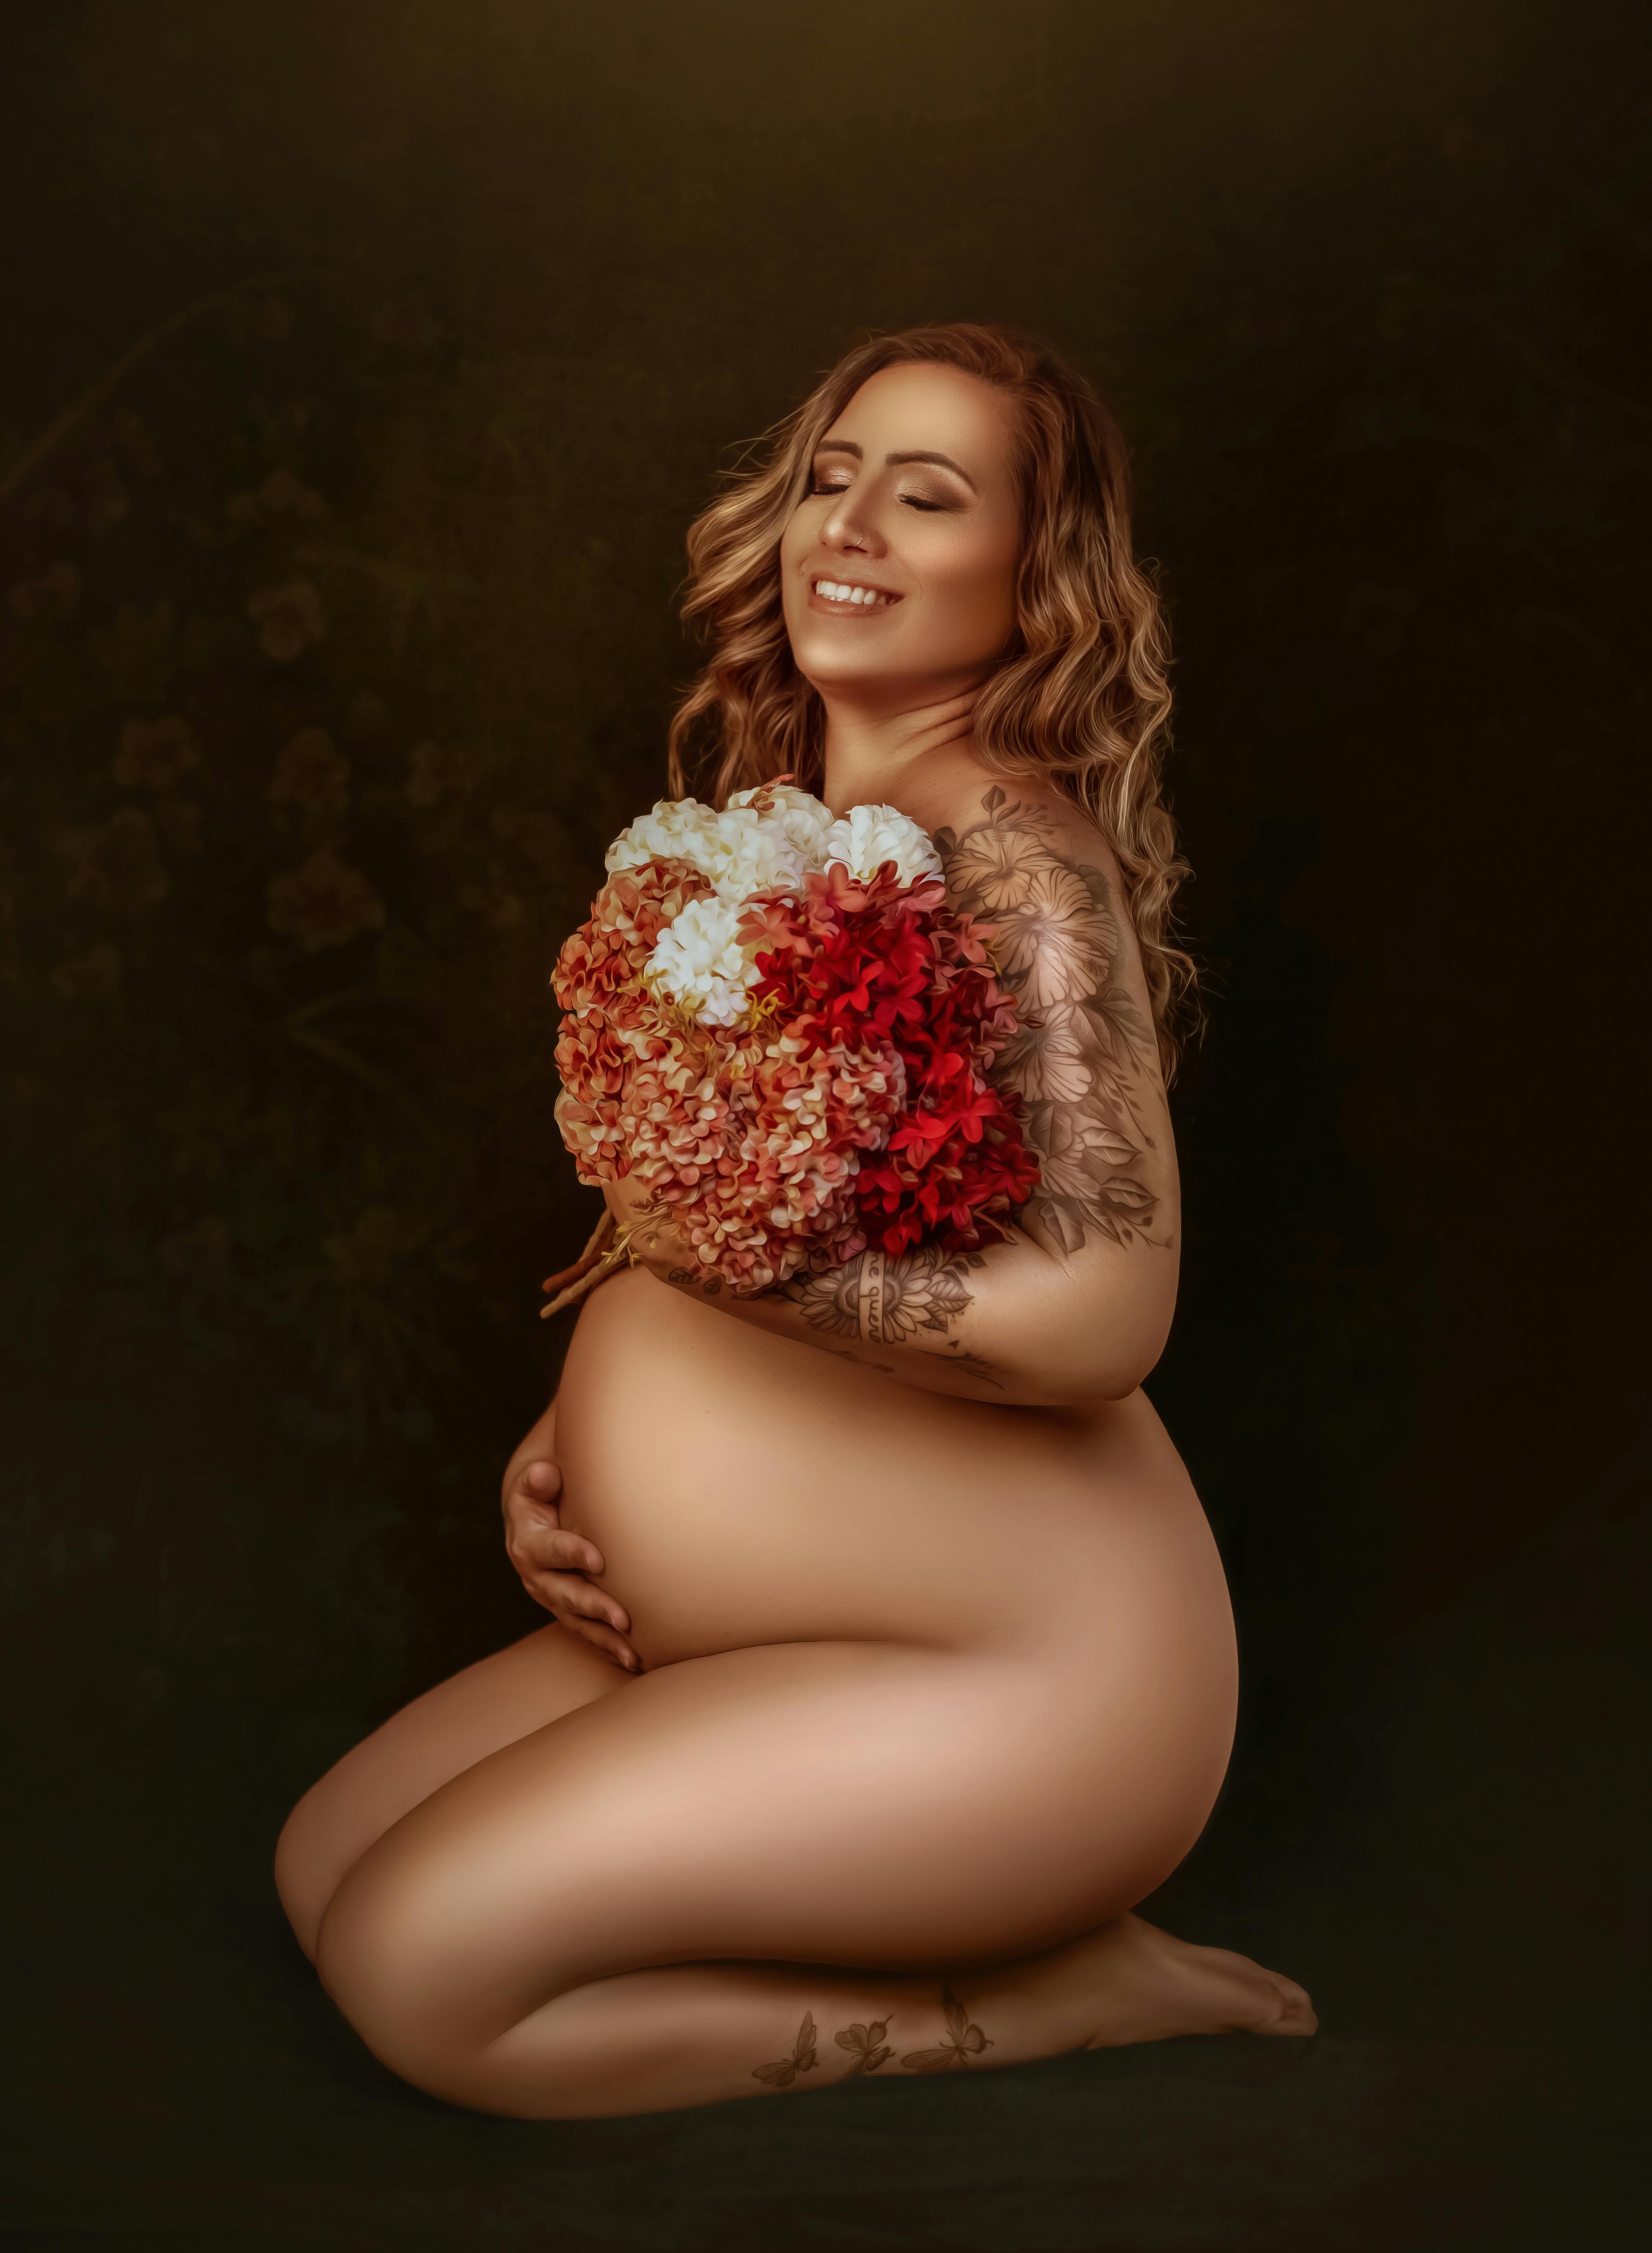 Beautiful Naked Pregnant Ladies - Naked pregnant woman with bouquet of flowers sitting on knees Â· Free Stock  Photo